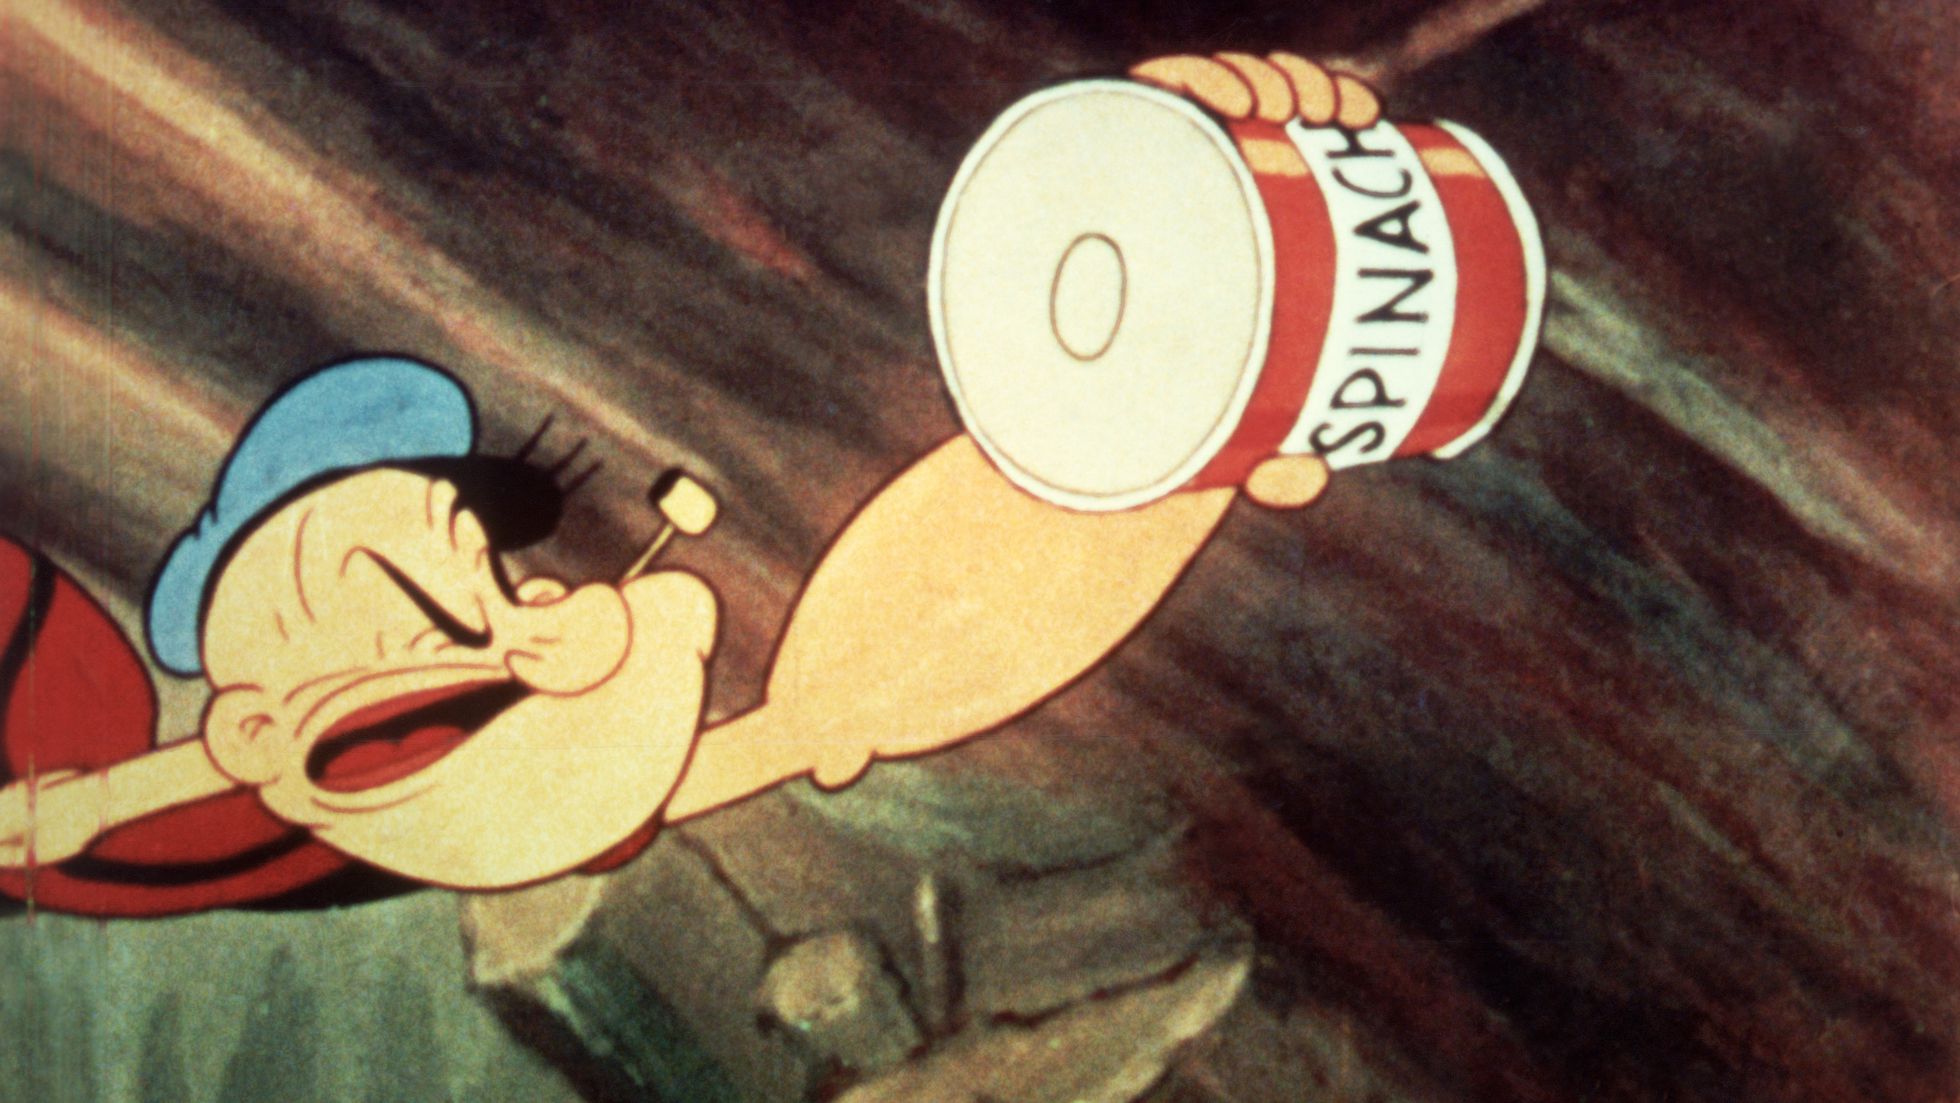 Cannabis or spinach? Behind Popeye's century-old legend | Culture | EL PAÍS  English Edition